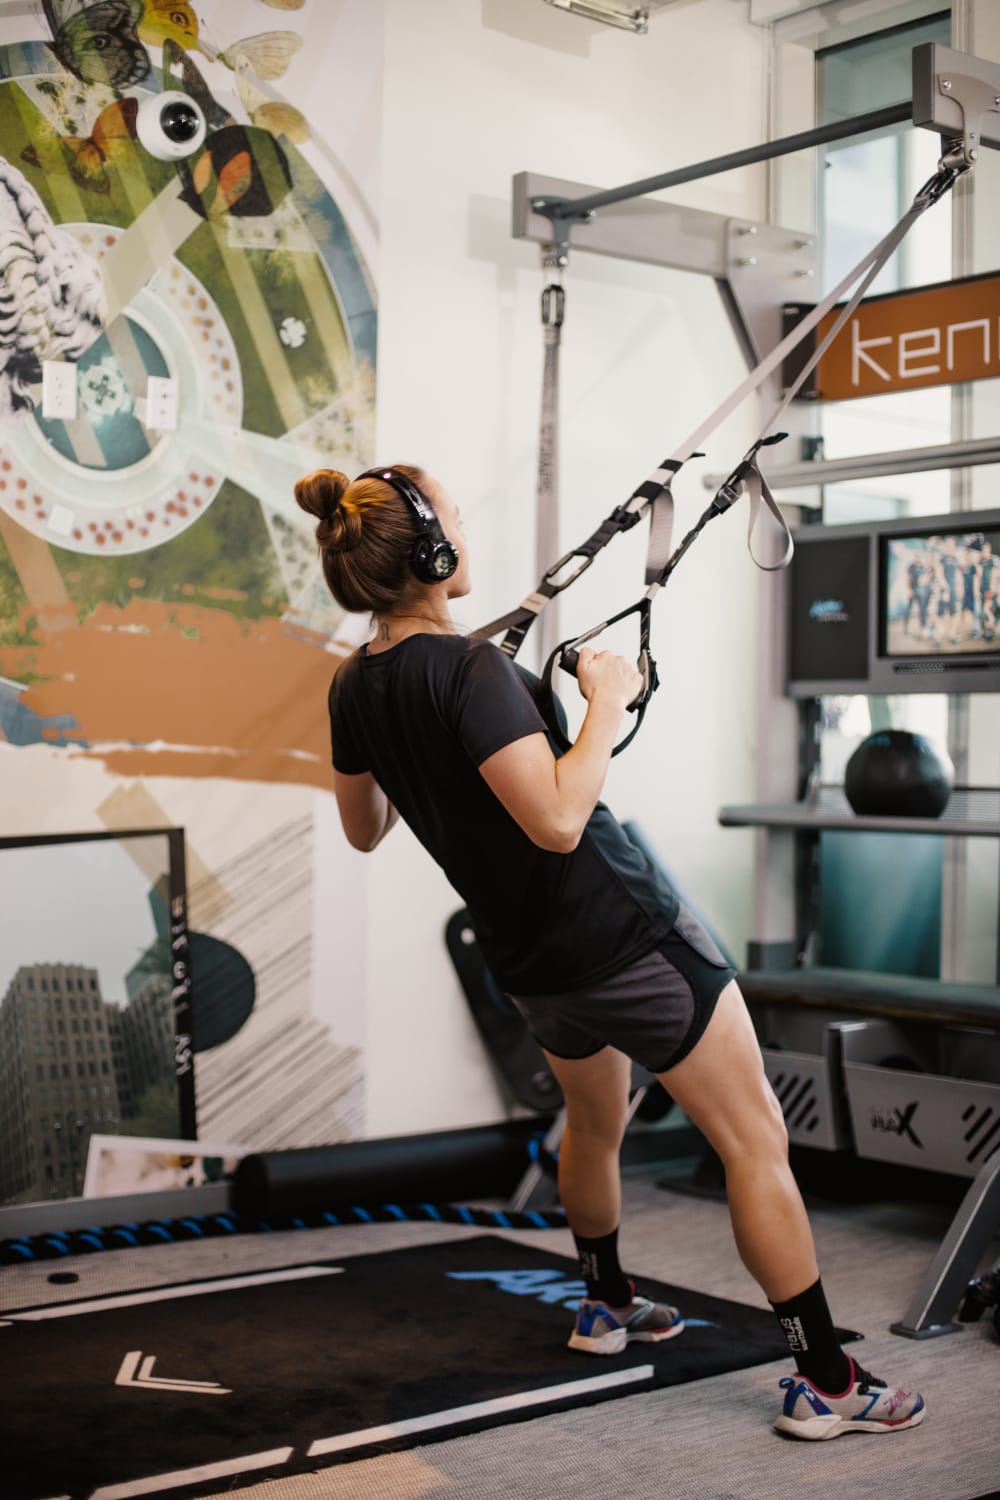 Resident working out in the fitness studio with TRX equipment at Kenect Phoenix in Phoenix, Arizona